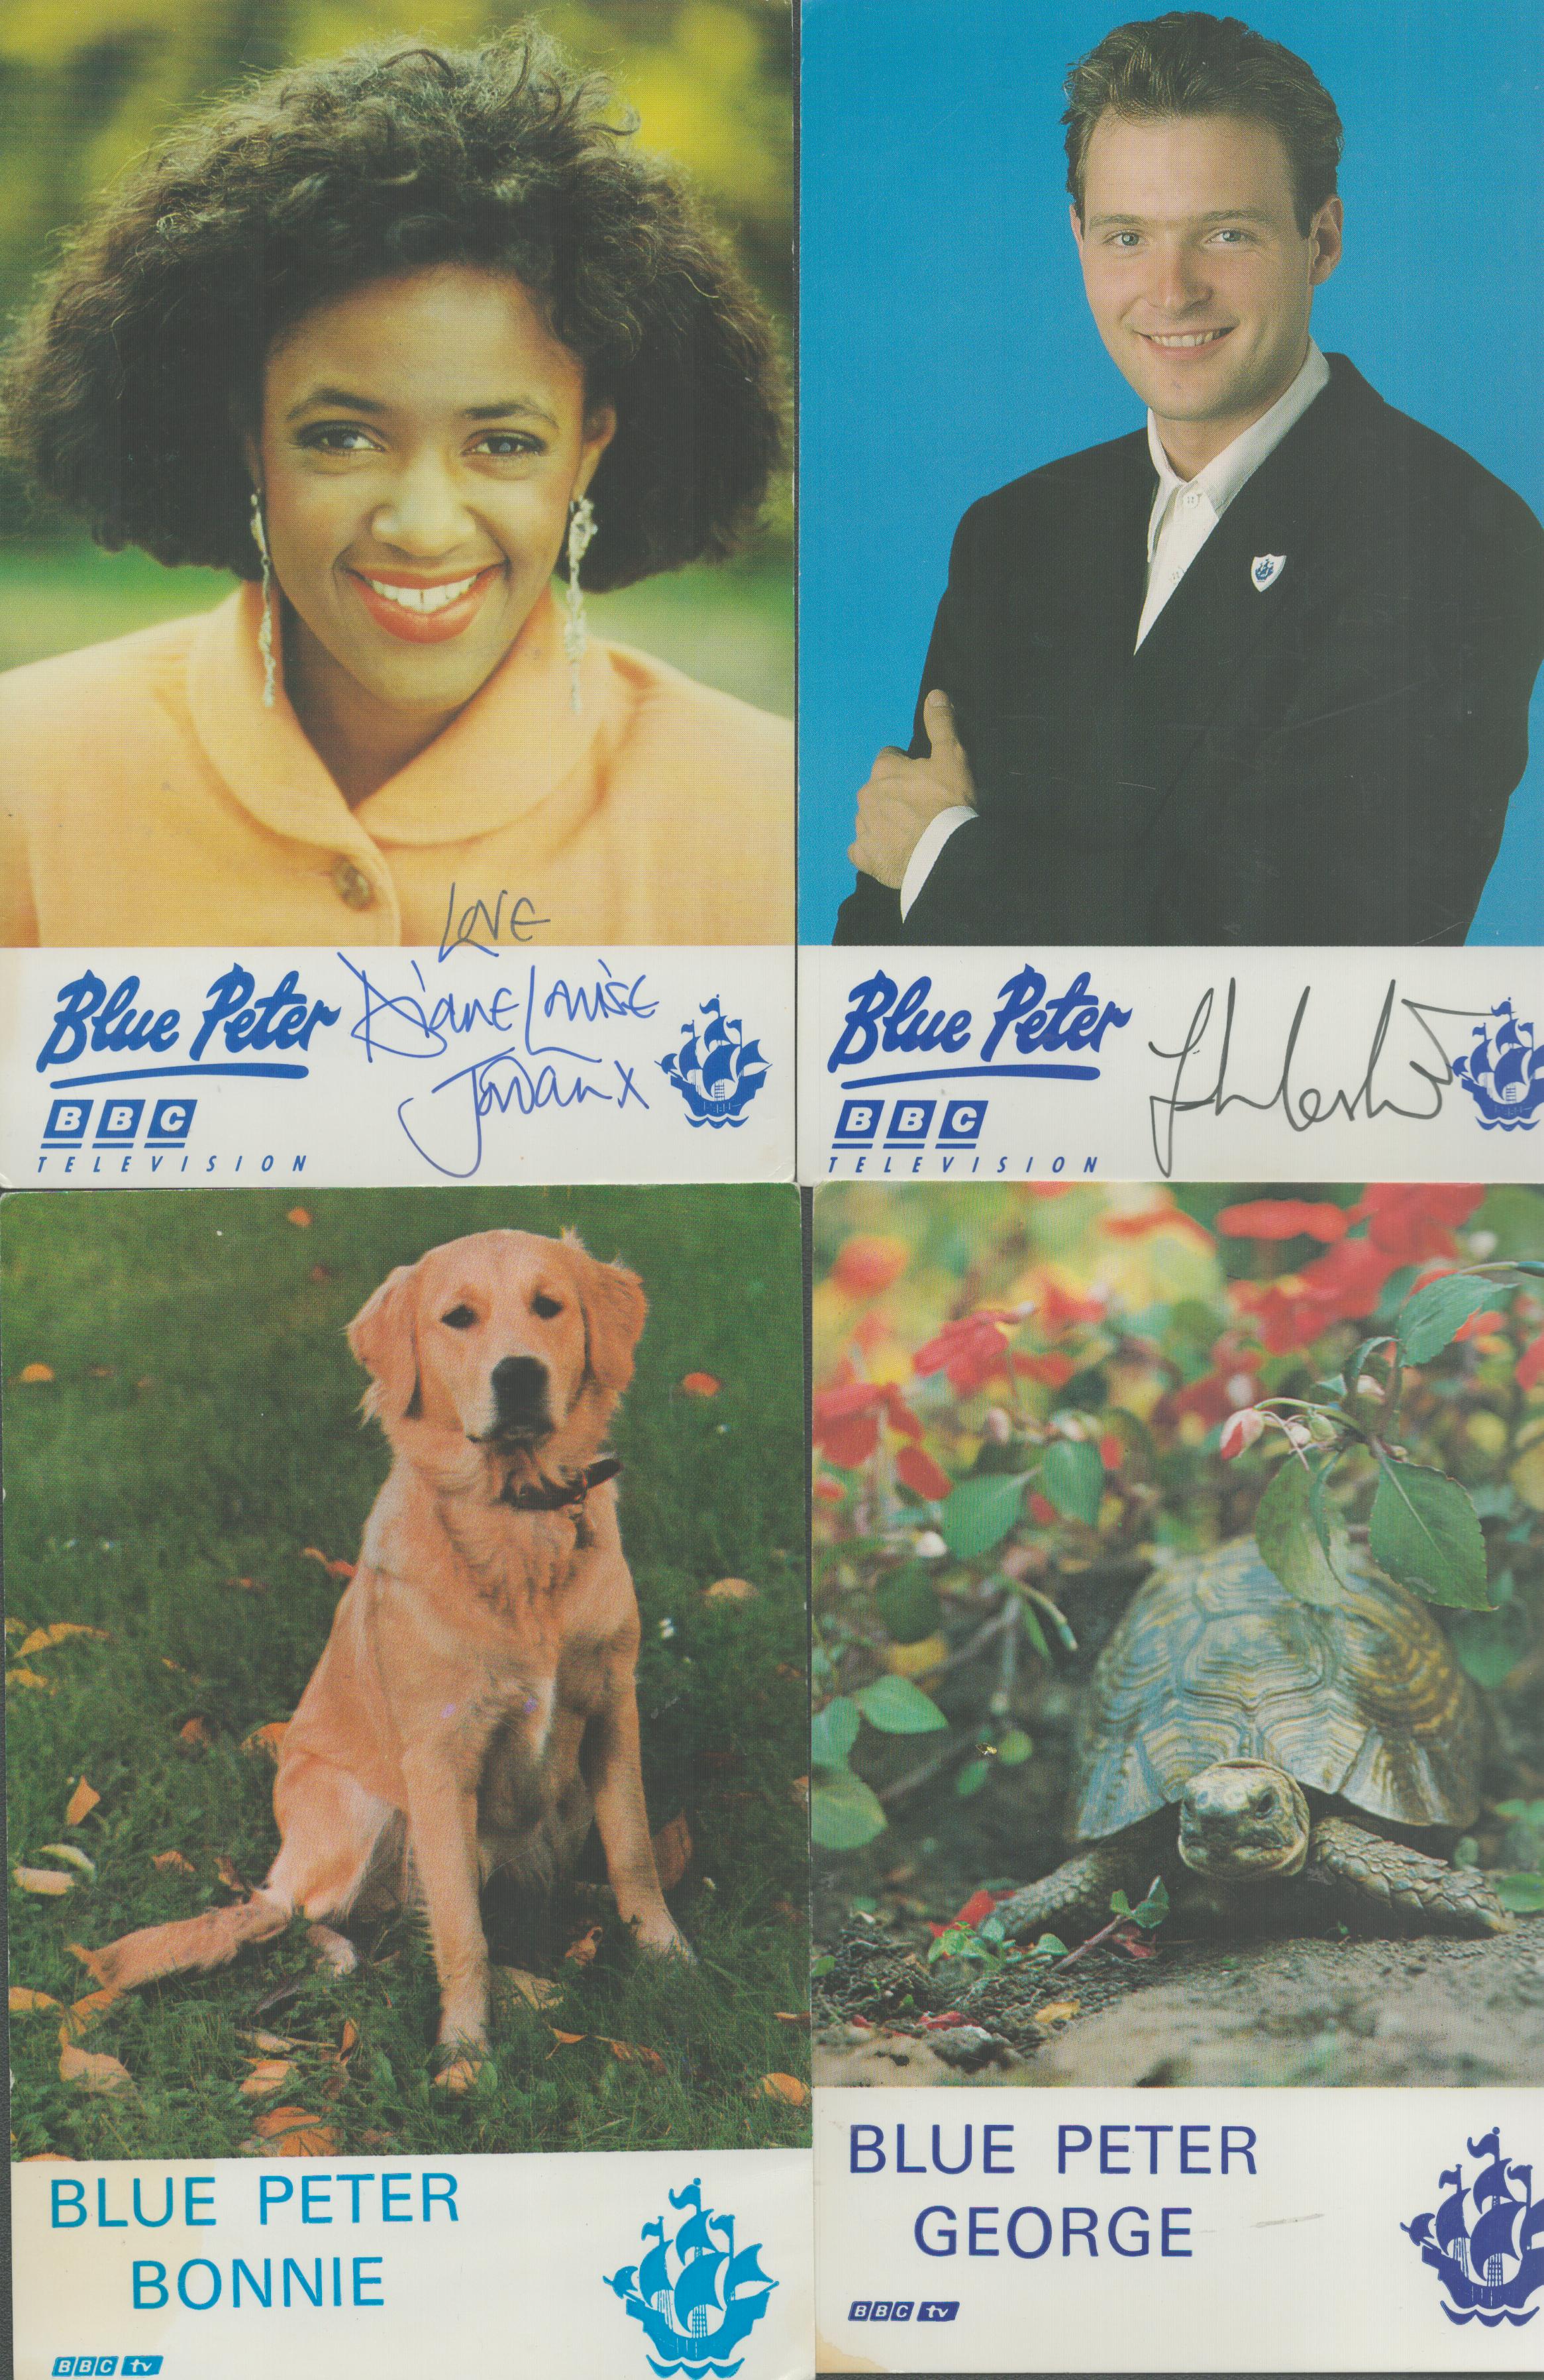 Blue Peter collection of 4 6x4promo photos 2 signed and 2 unsigned. Diane-Louise Jordan and John